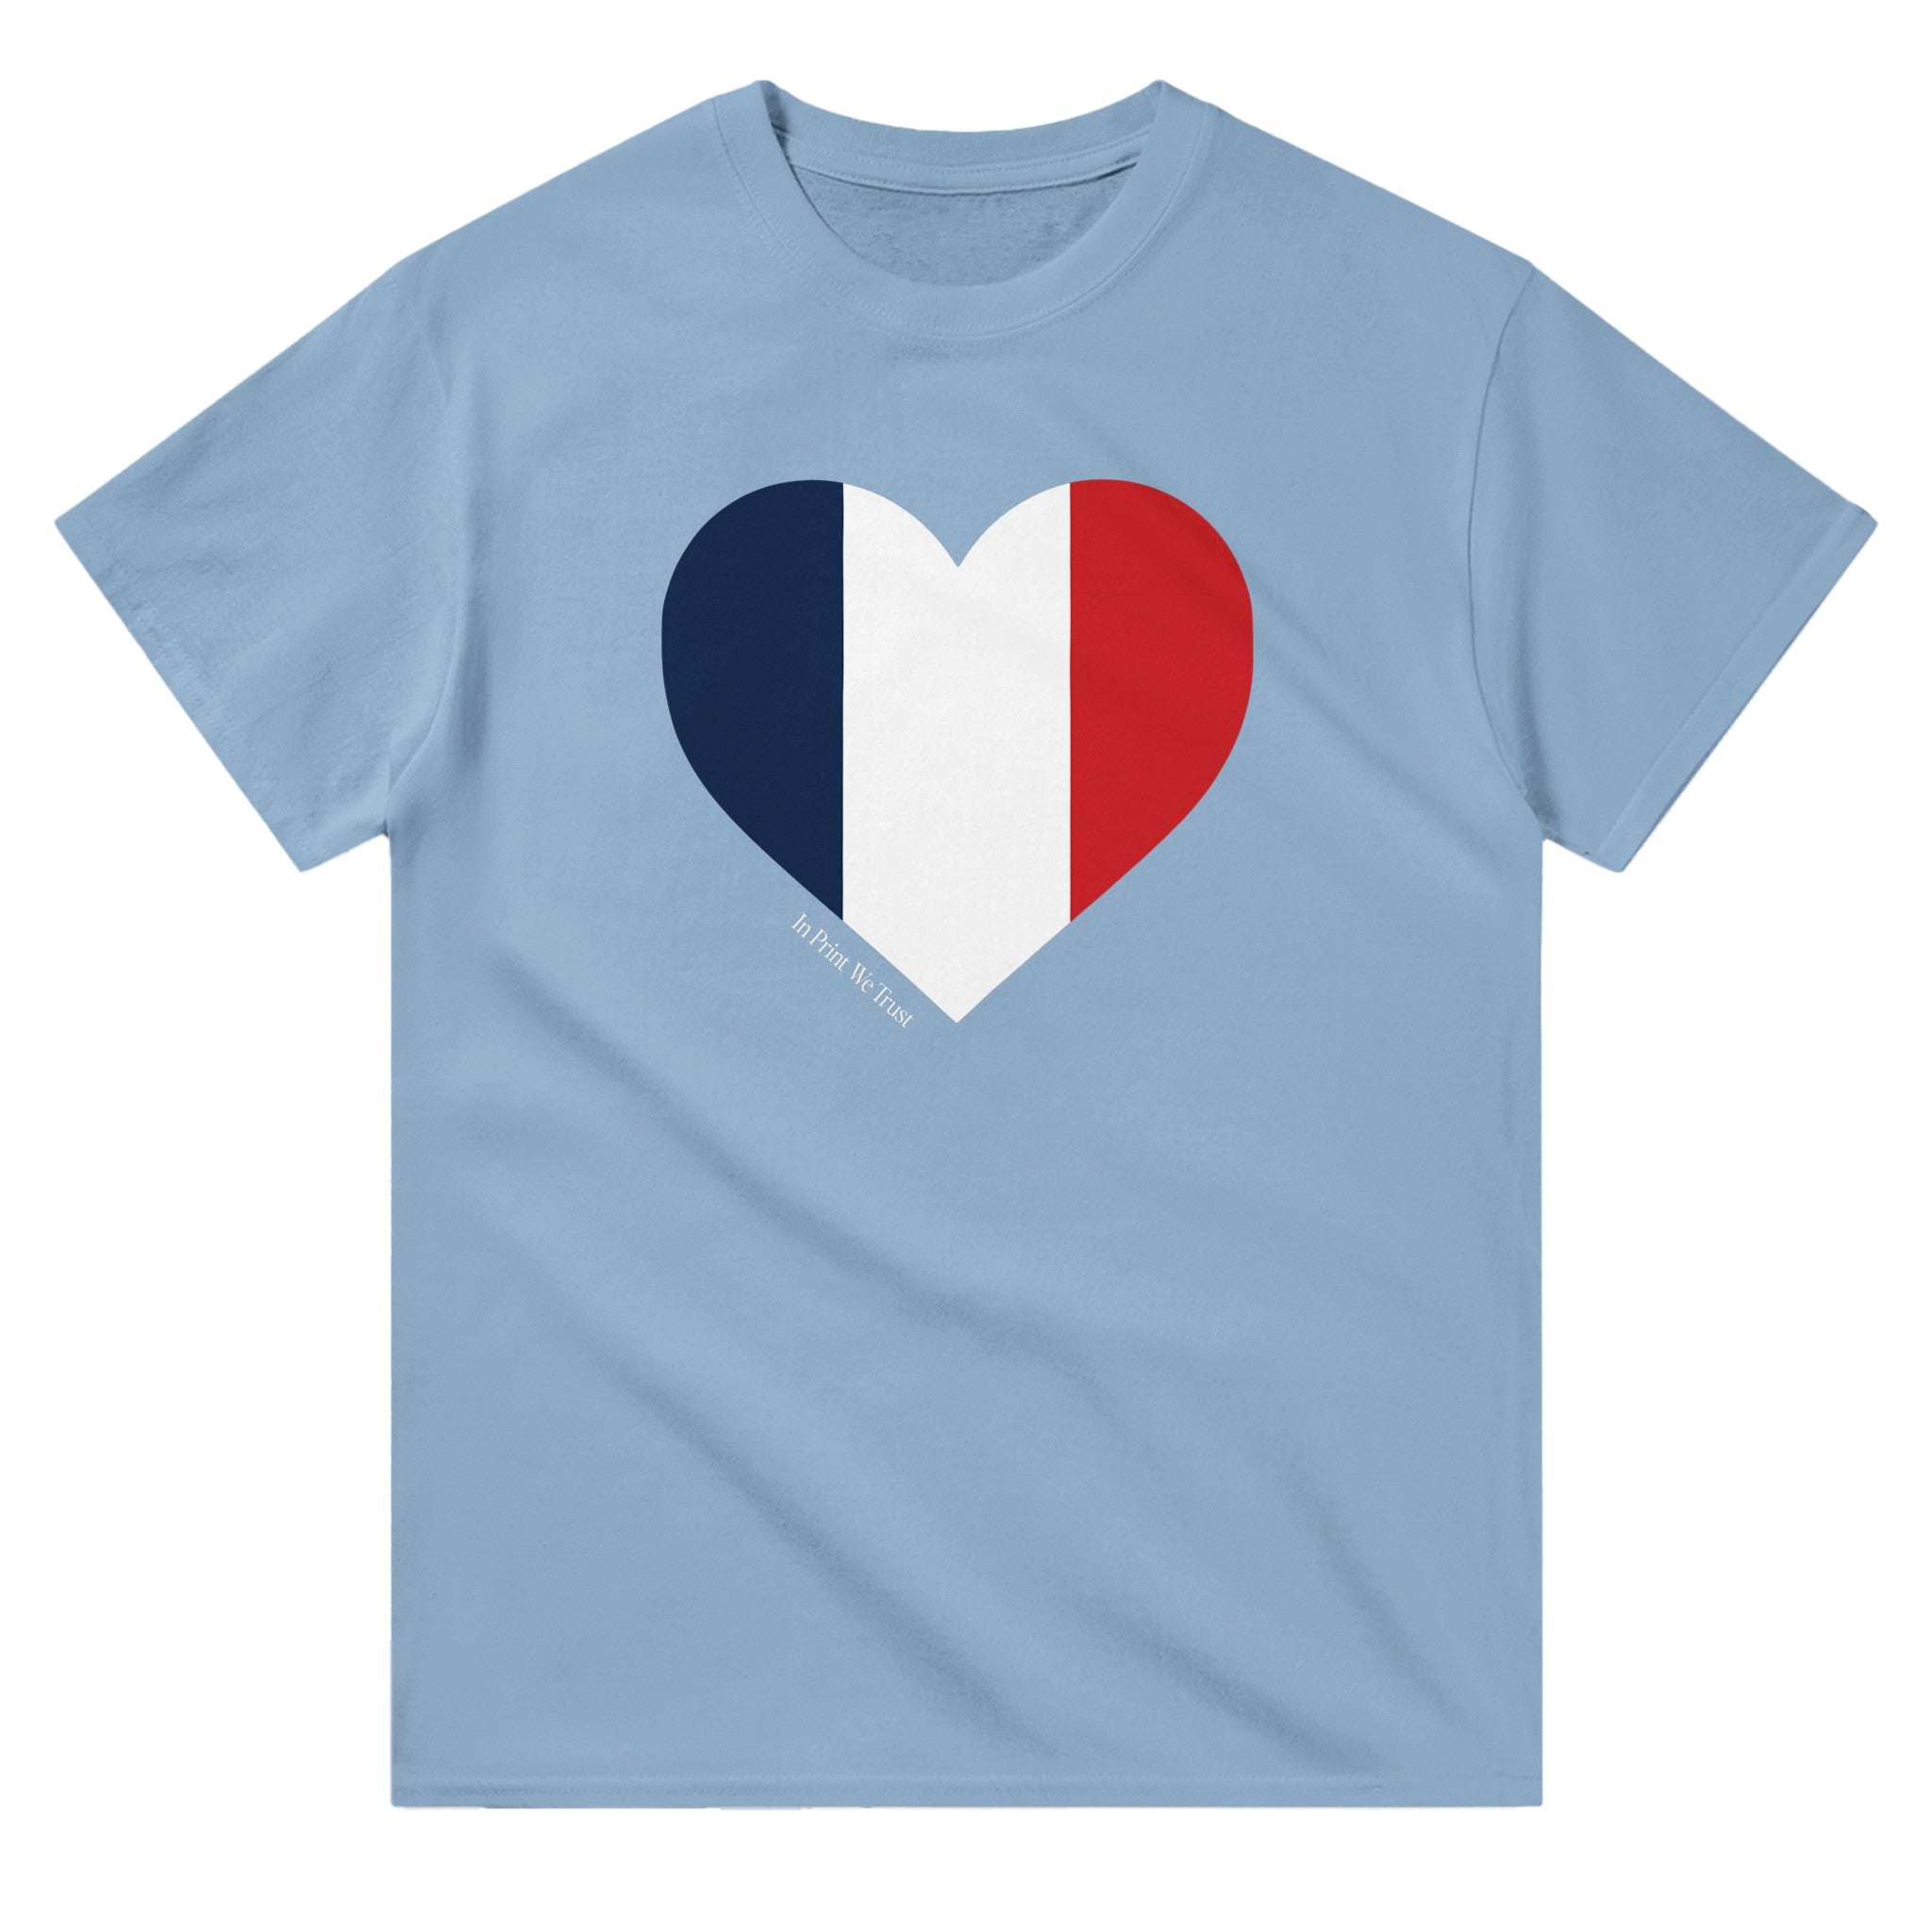 'France' classic tee - In Print We Trust